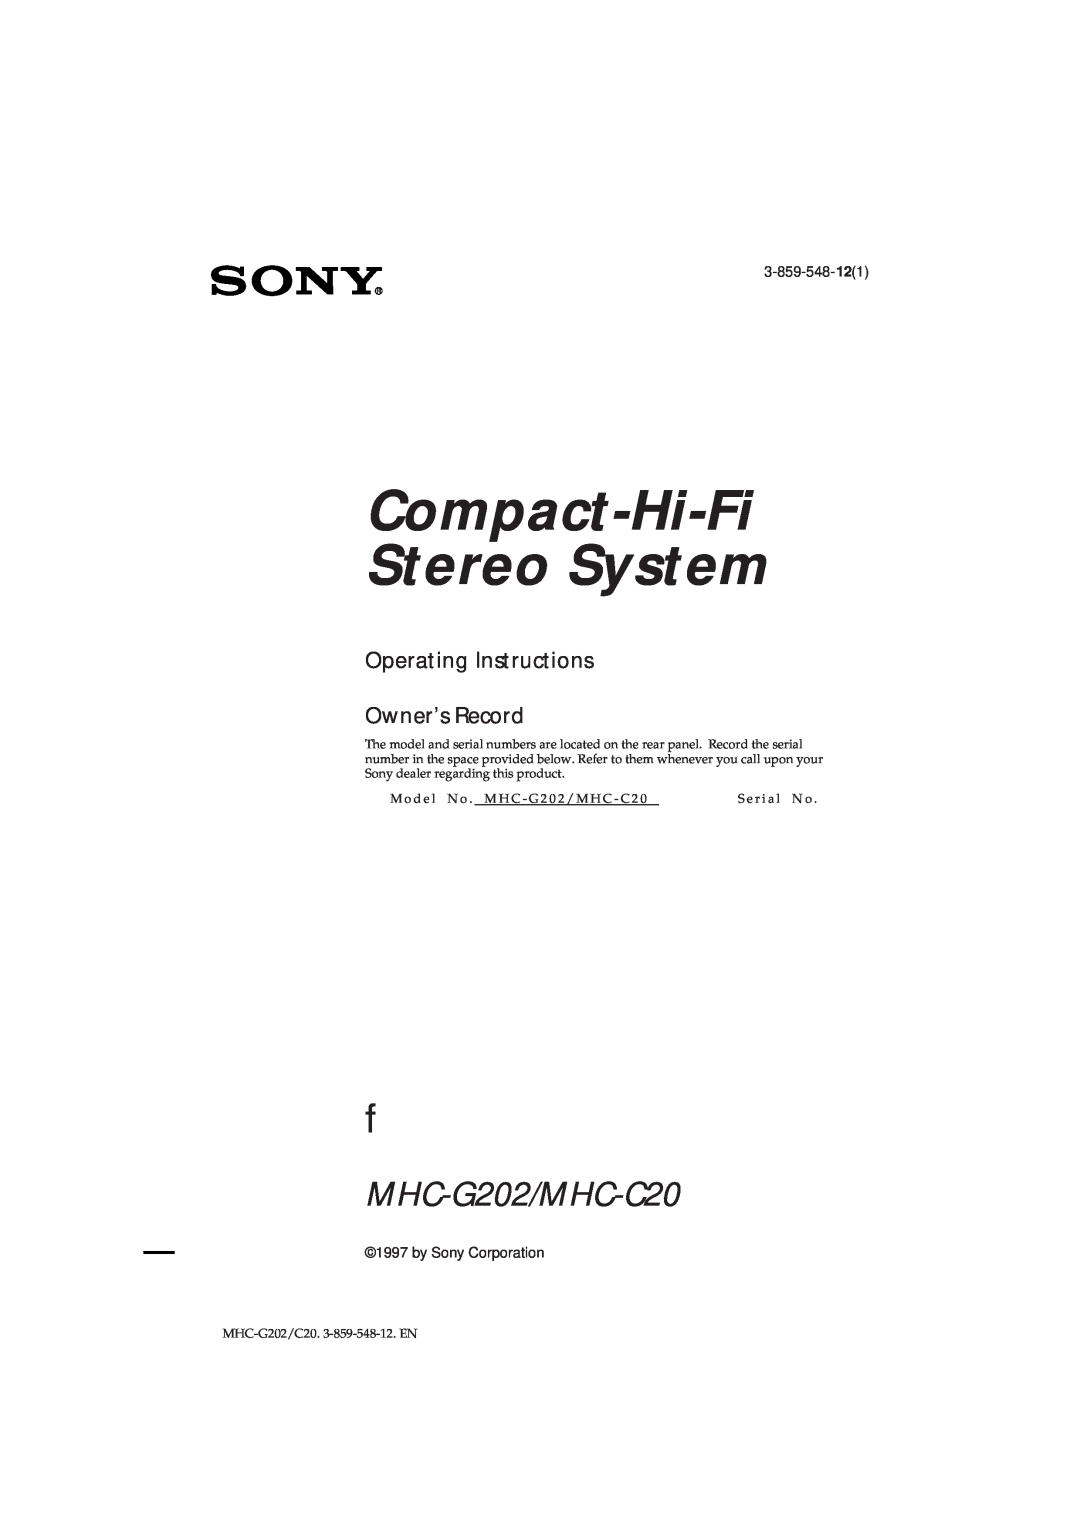 Sony MHC-G202/C20 manual Compact-Hi-Fi Stereo System, MHC-G202/MHC-C20, Operating Instructions Owner’s Record 